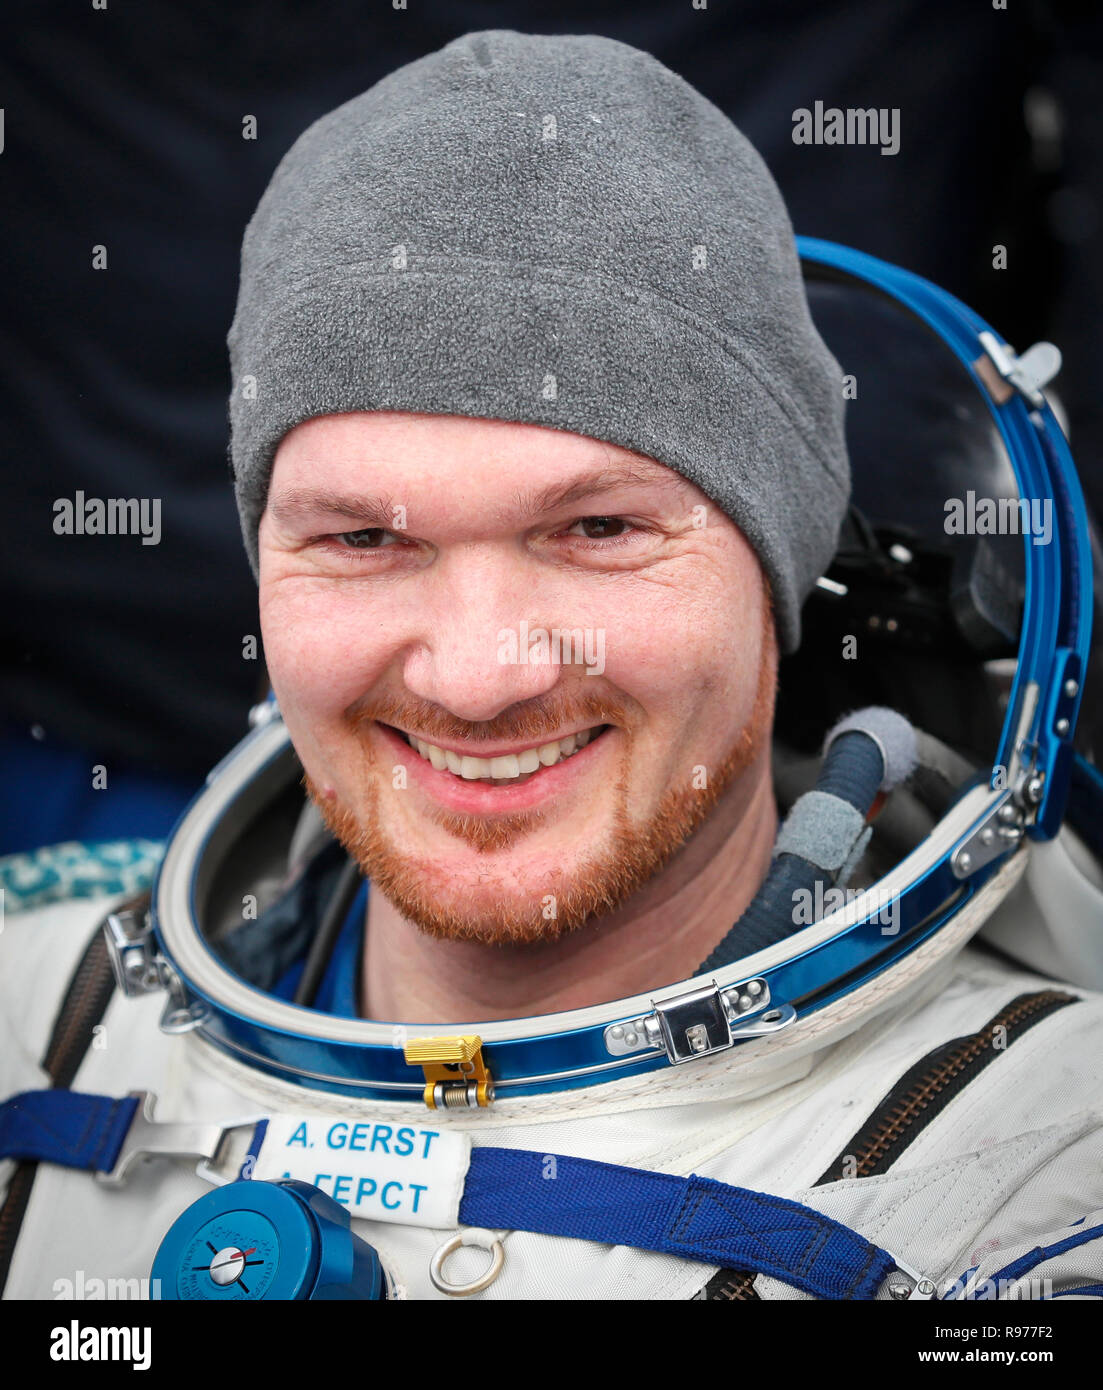 International Space Station (ISS) crew member astronaut Alexander Gerst, of Germany, smiles after landing in a remote area outside the town of Zhezkazgan, formerly known as Dzhezkazgan, Kazakhstan, on Thursday, Dec. 20, 2018. Three astronauts have returned to Earth after more than six months aboard the International Space Station. (Shamil Zhumatov/Pool via AP) Stock Photo